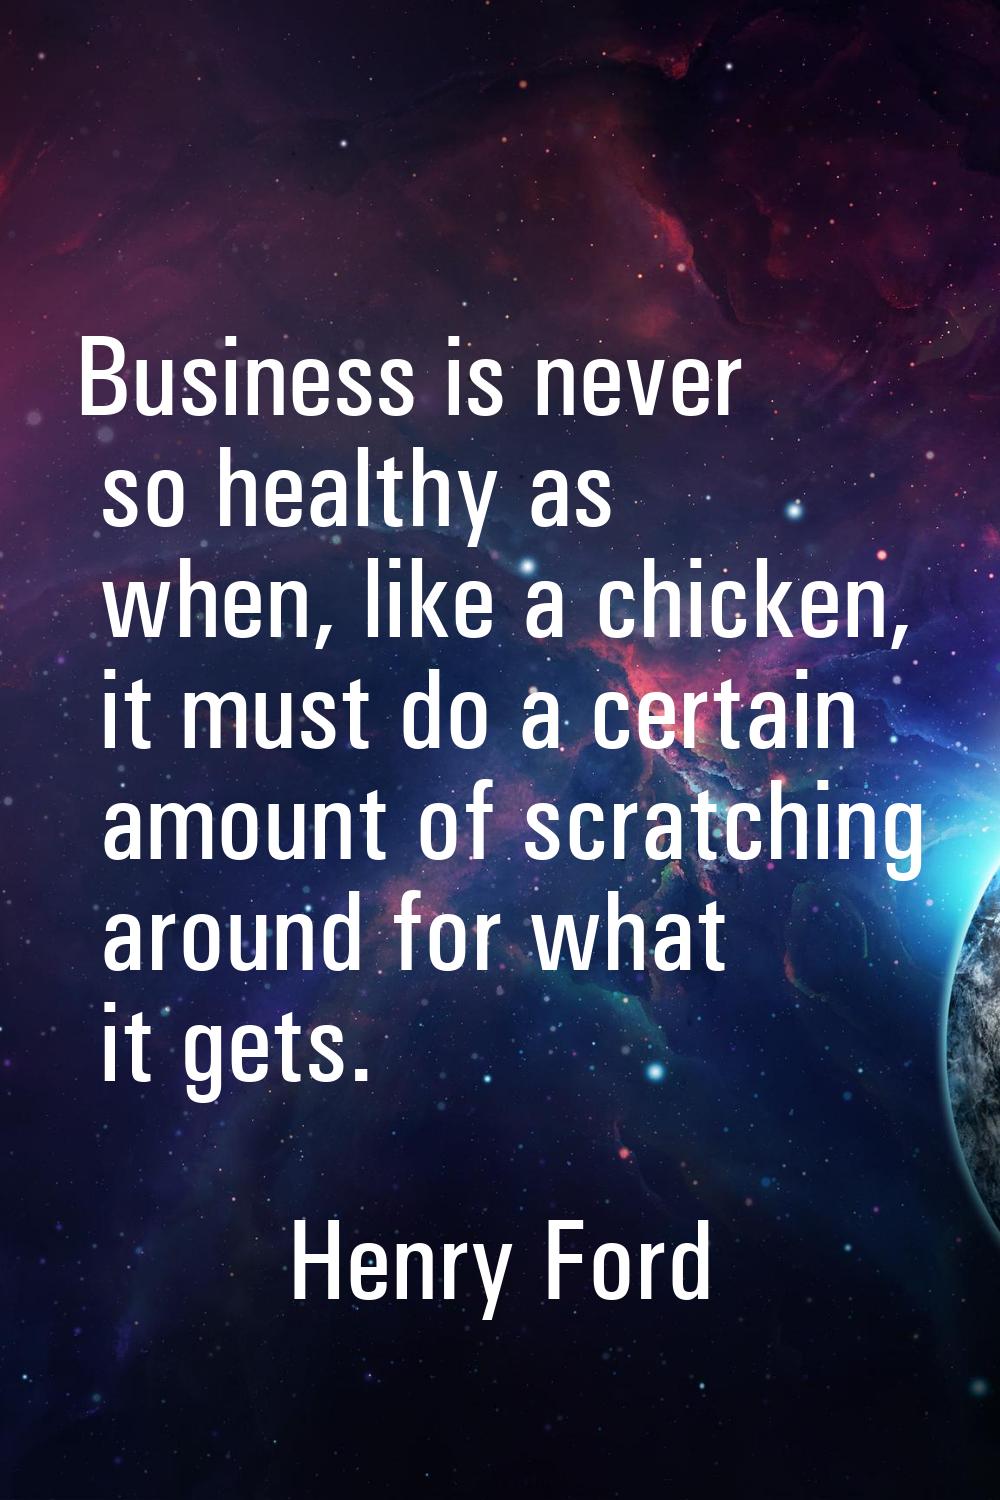 Business is never so healthy as when, like a chicken, it must do a certain amount of scratching aro